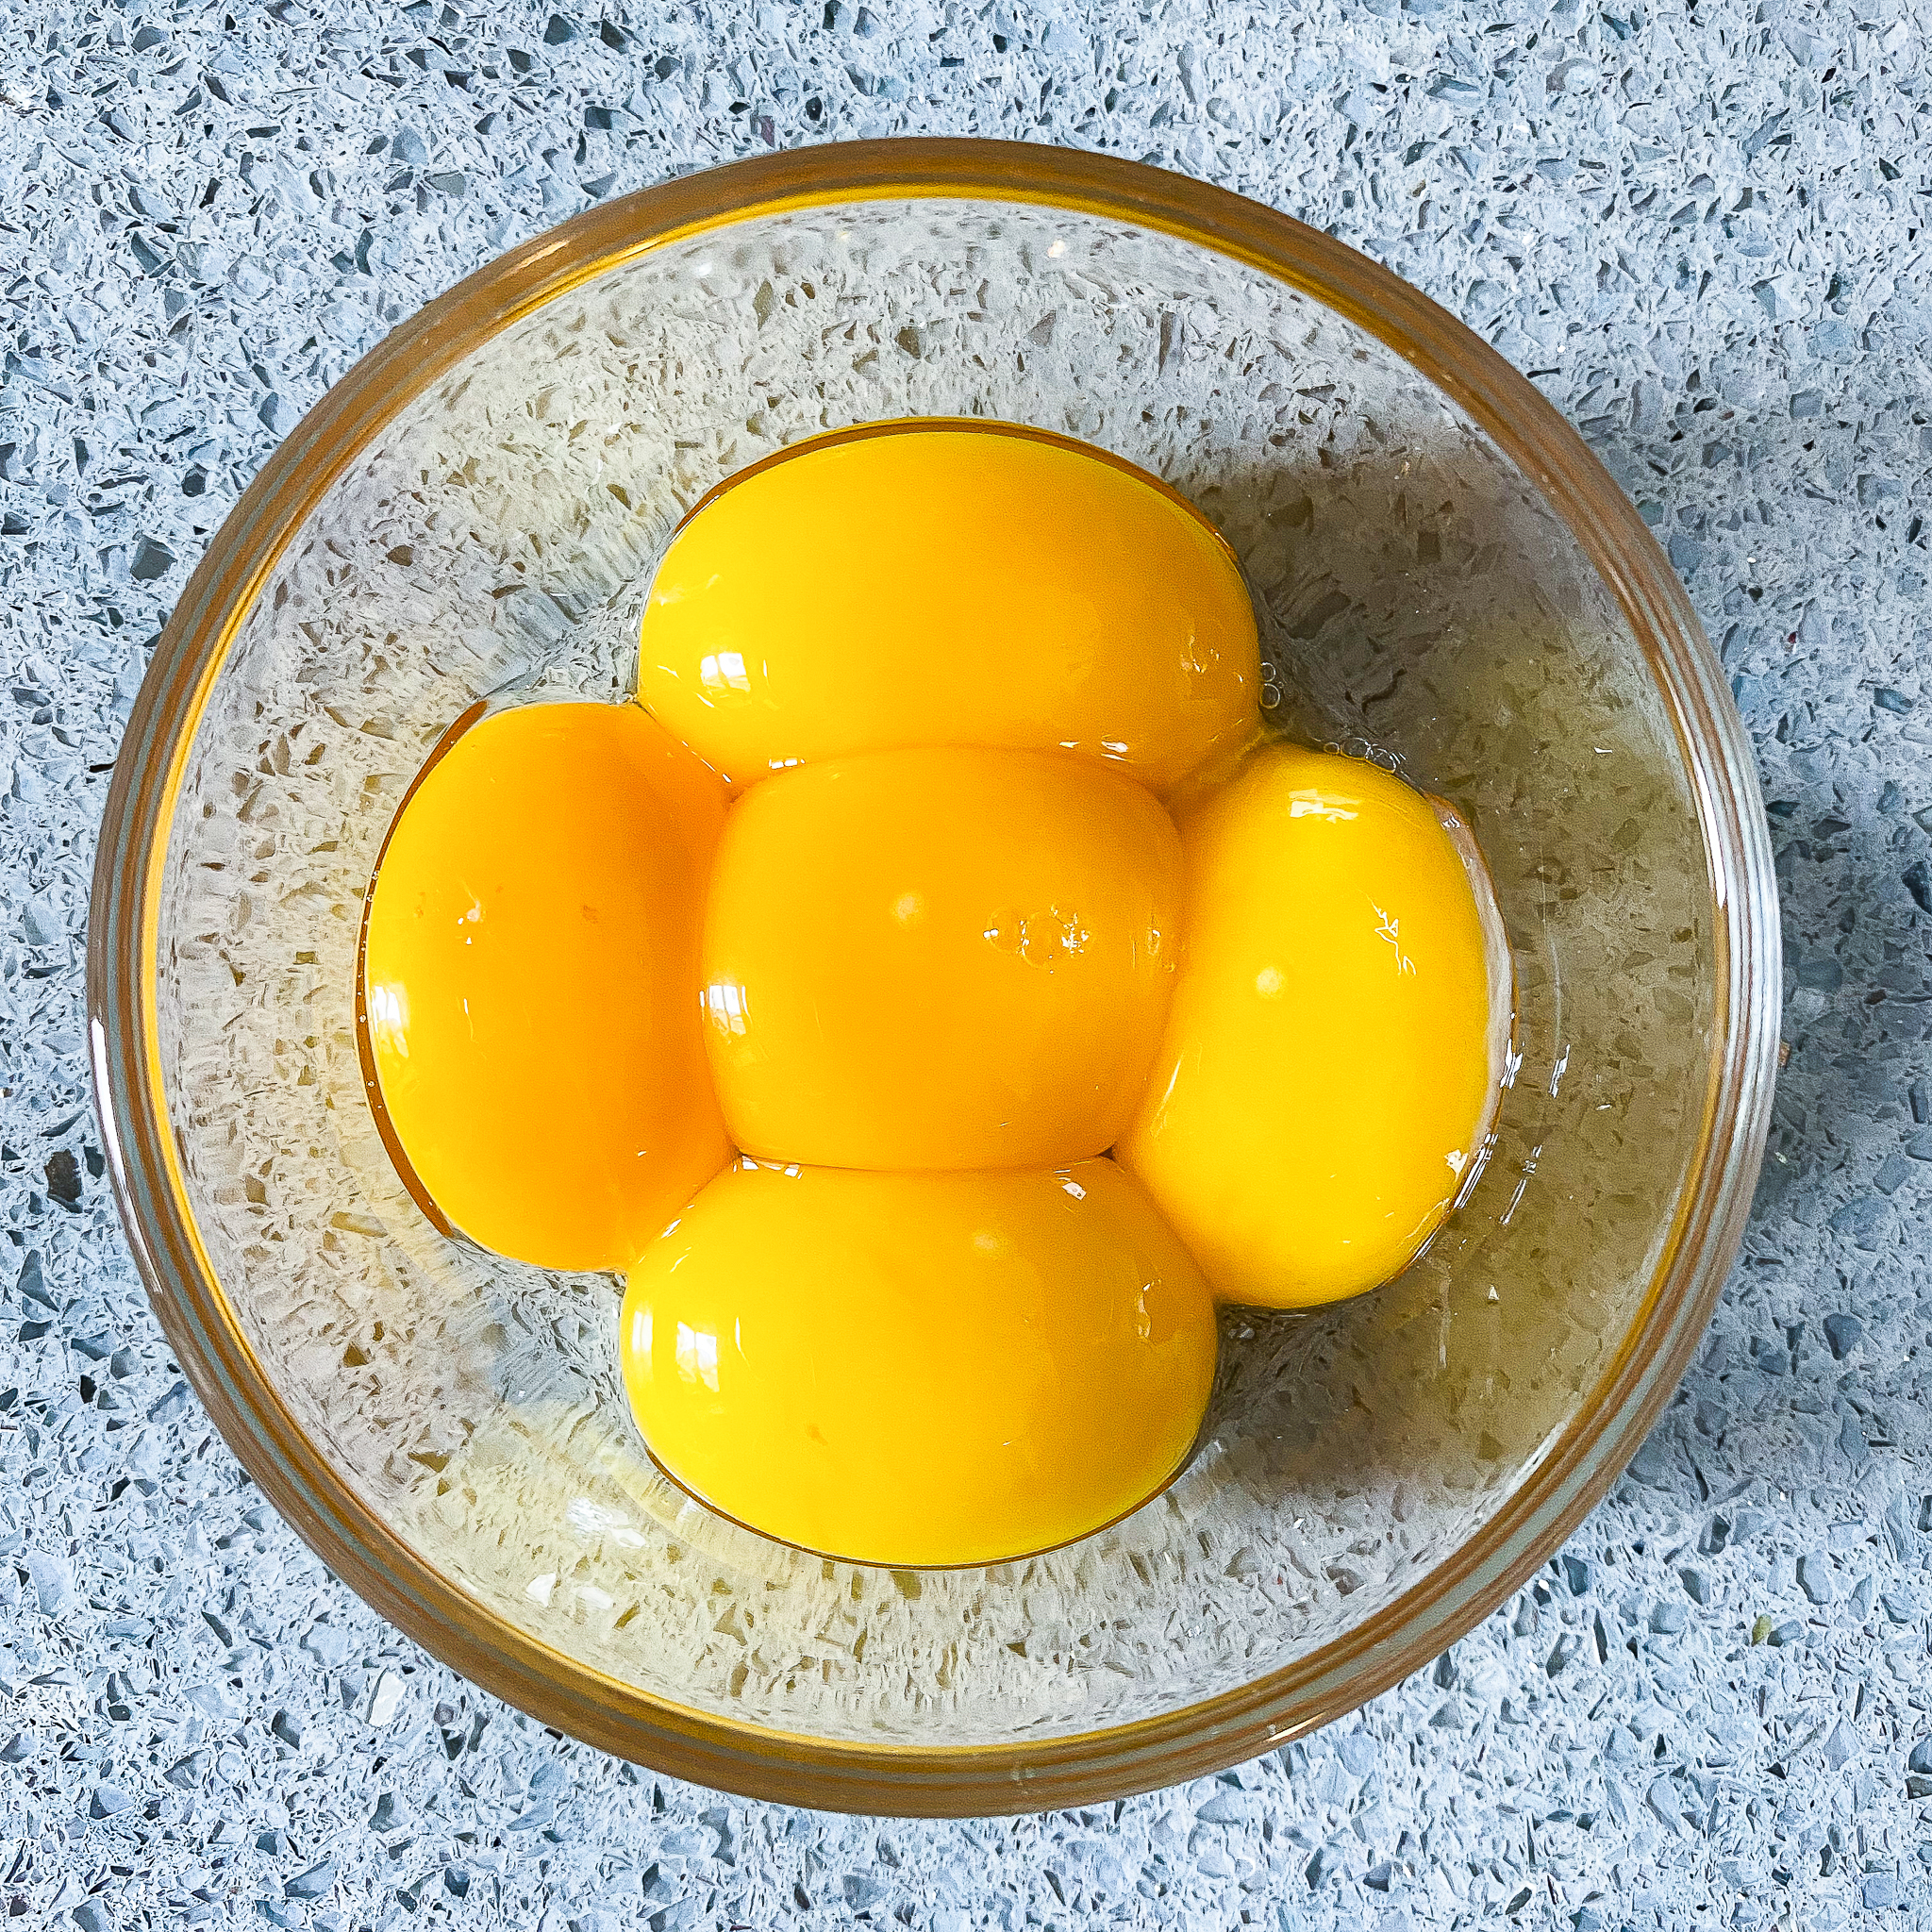 Overhead view of 5 egg yolks in a glass bowl